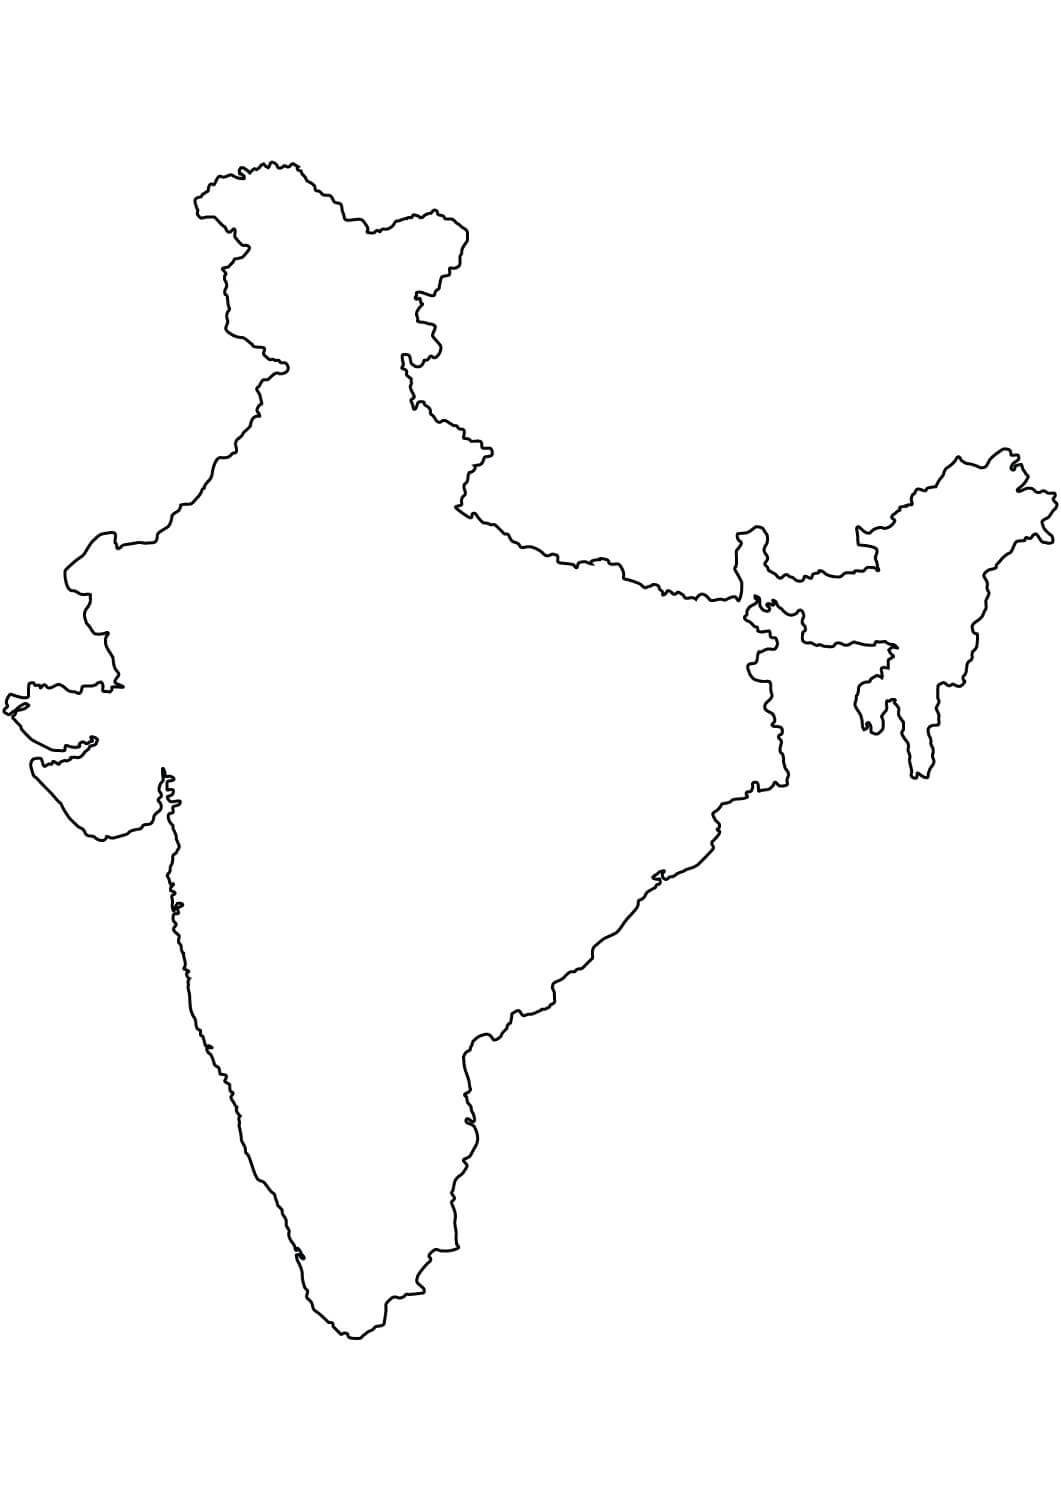 India Blank Outline Map